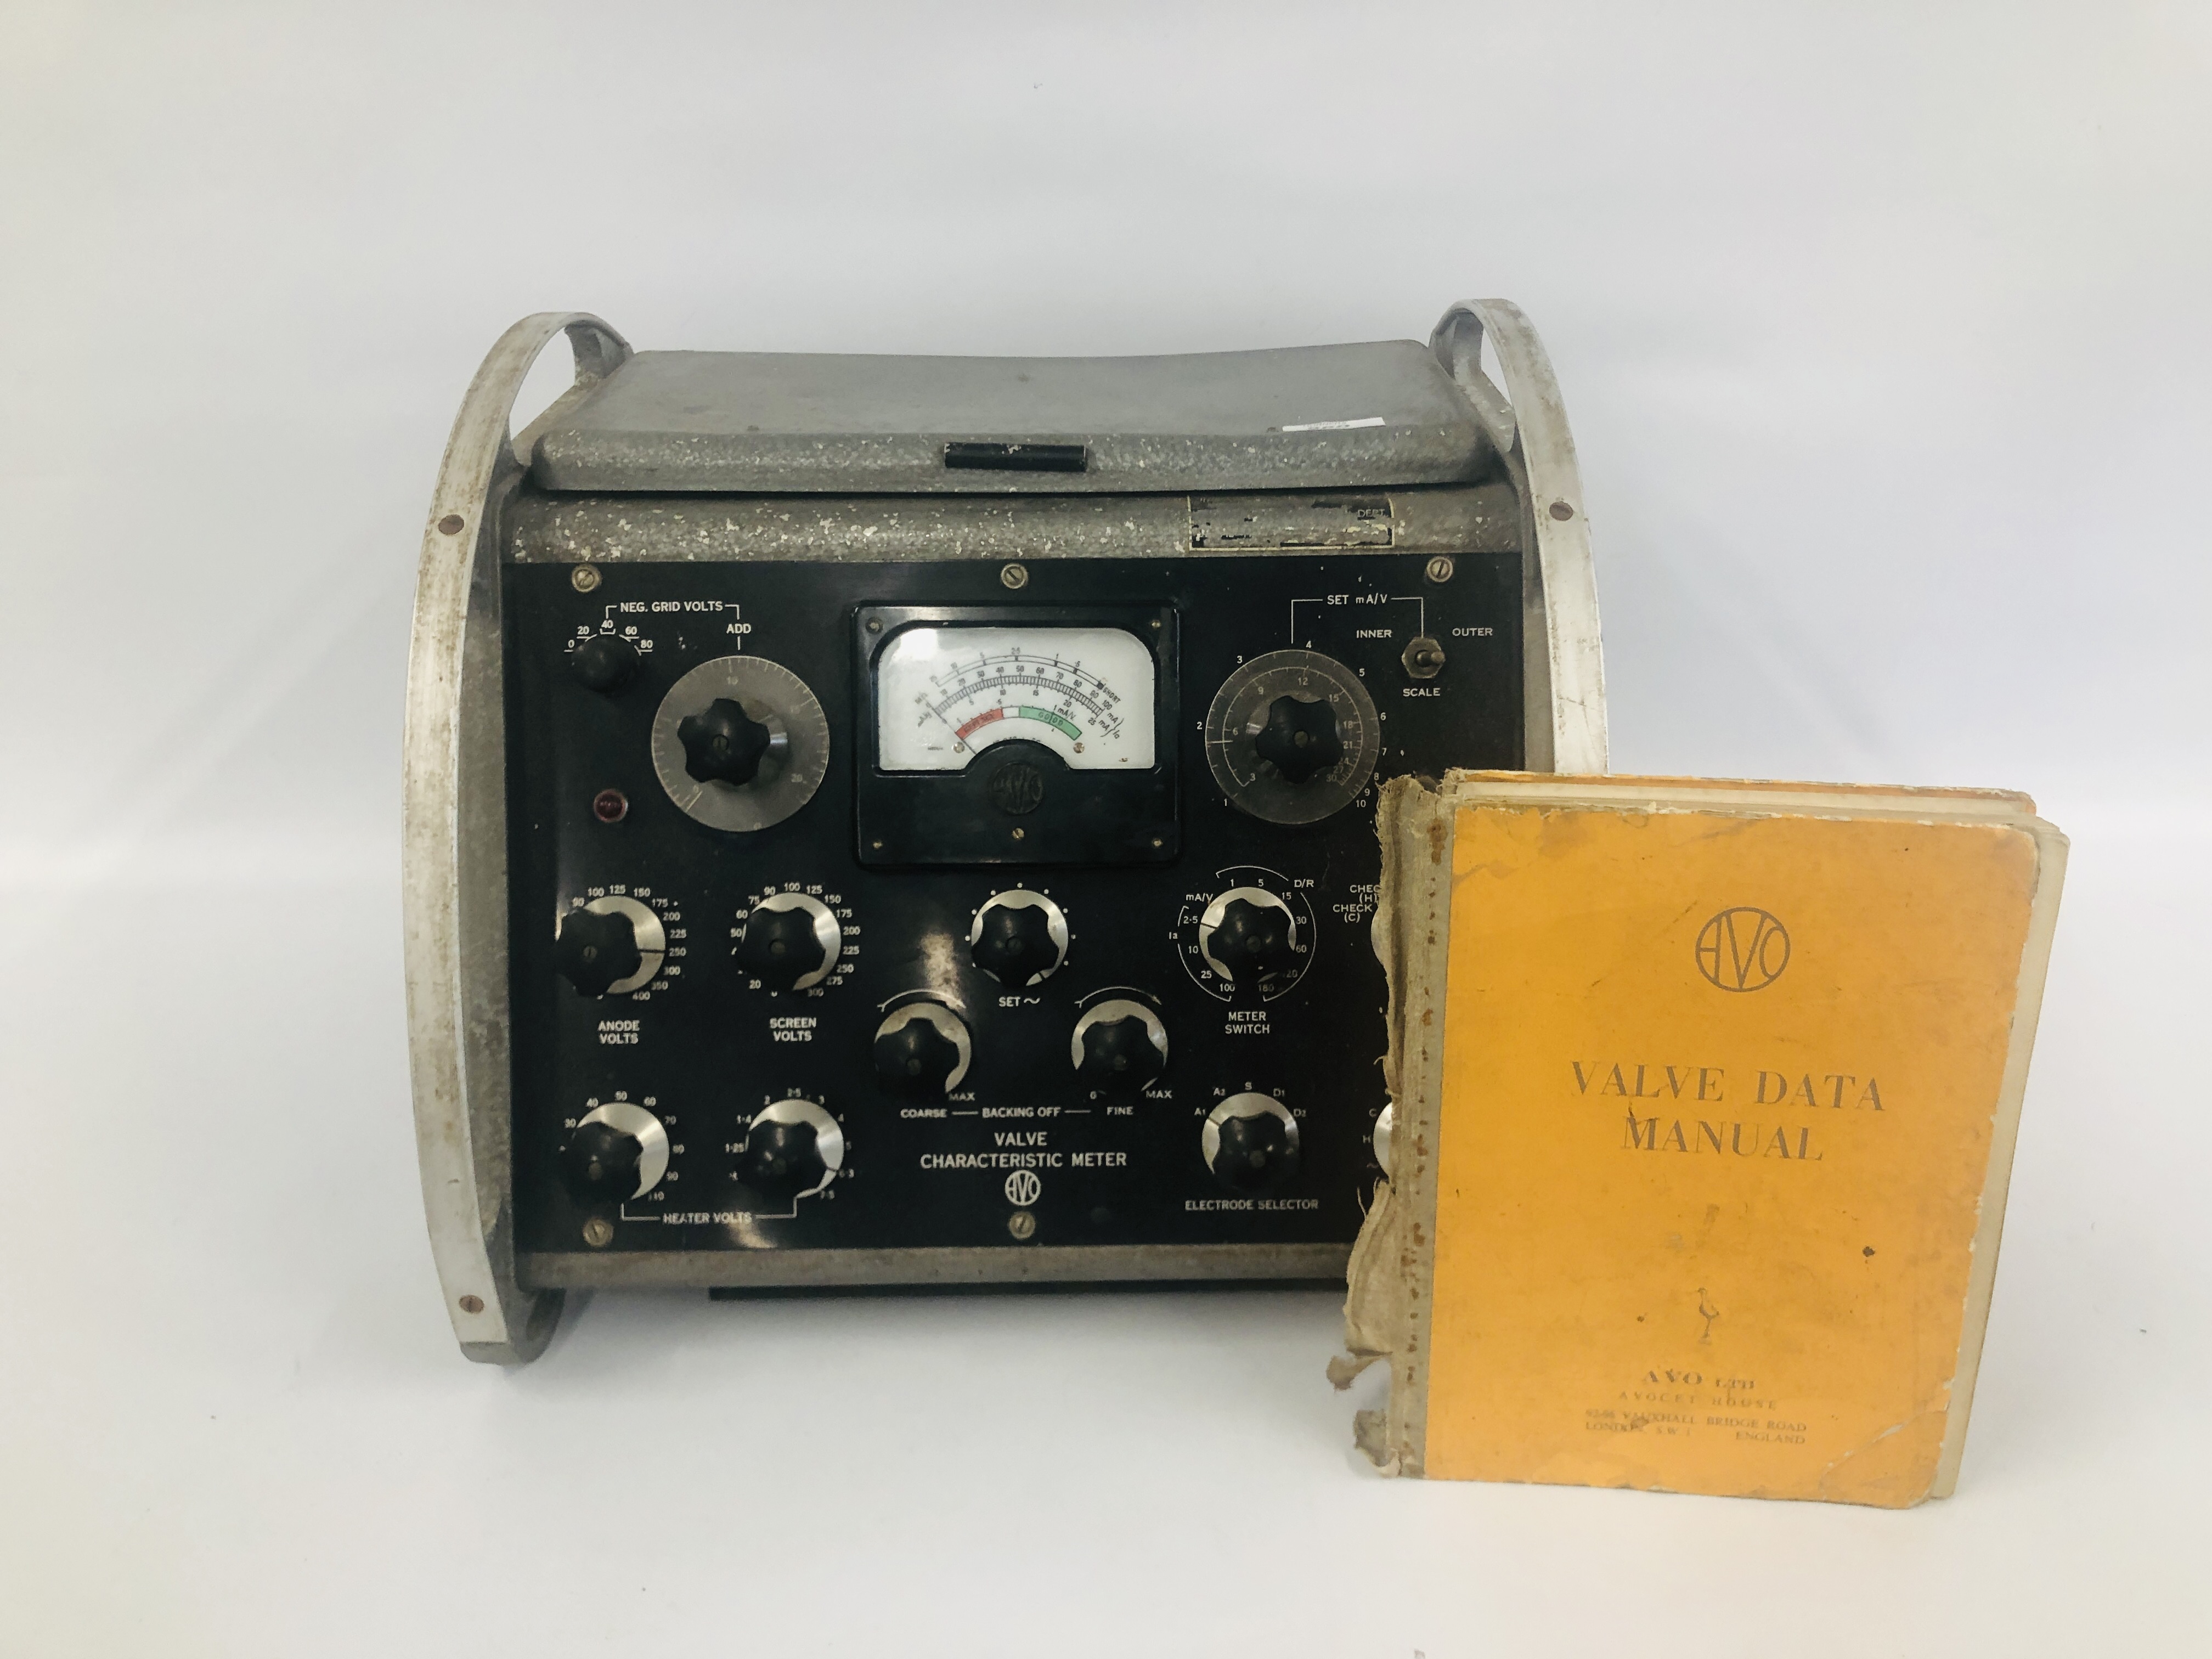 AVO LTD VALVE CHARACTERISTIC METER WITH ORIGINAL VALVE DATA MANUAL - COLLECTORS ITEM ONLY.